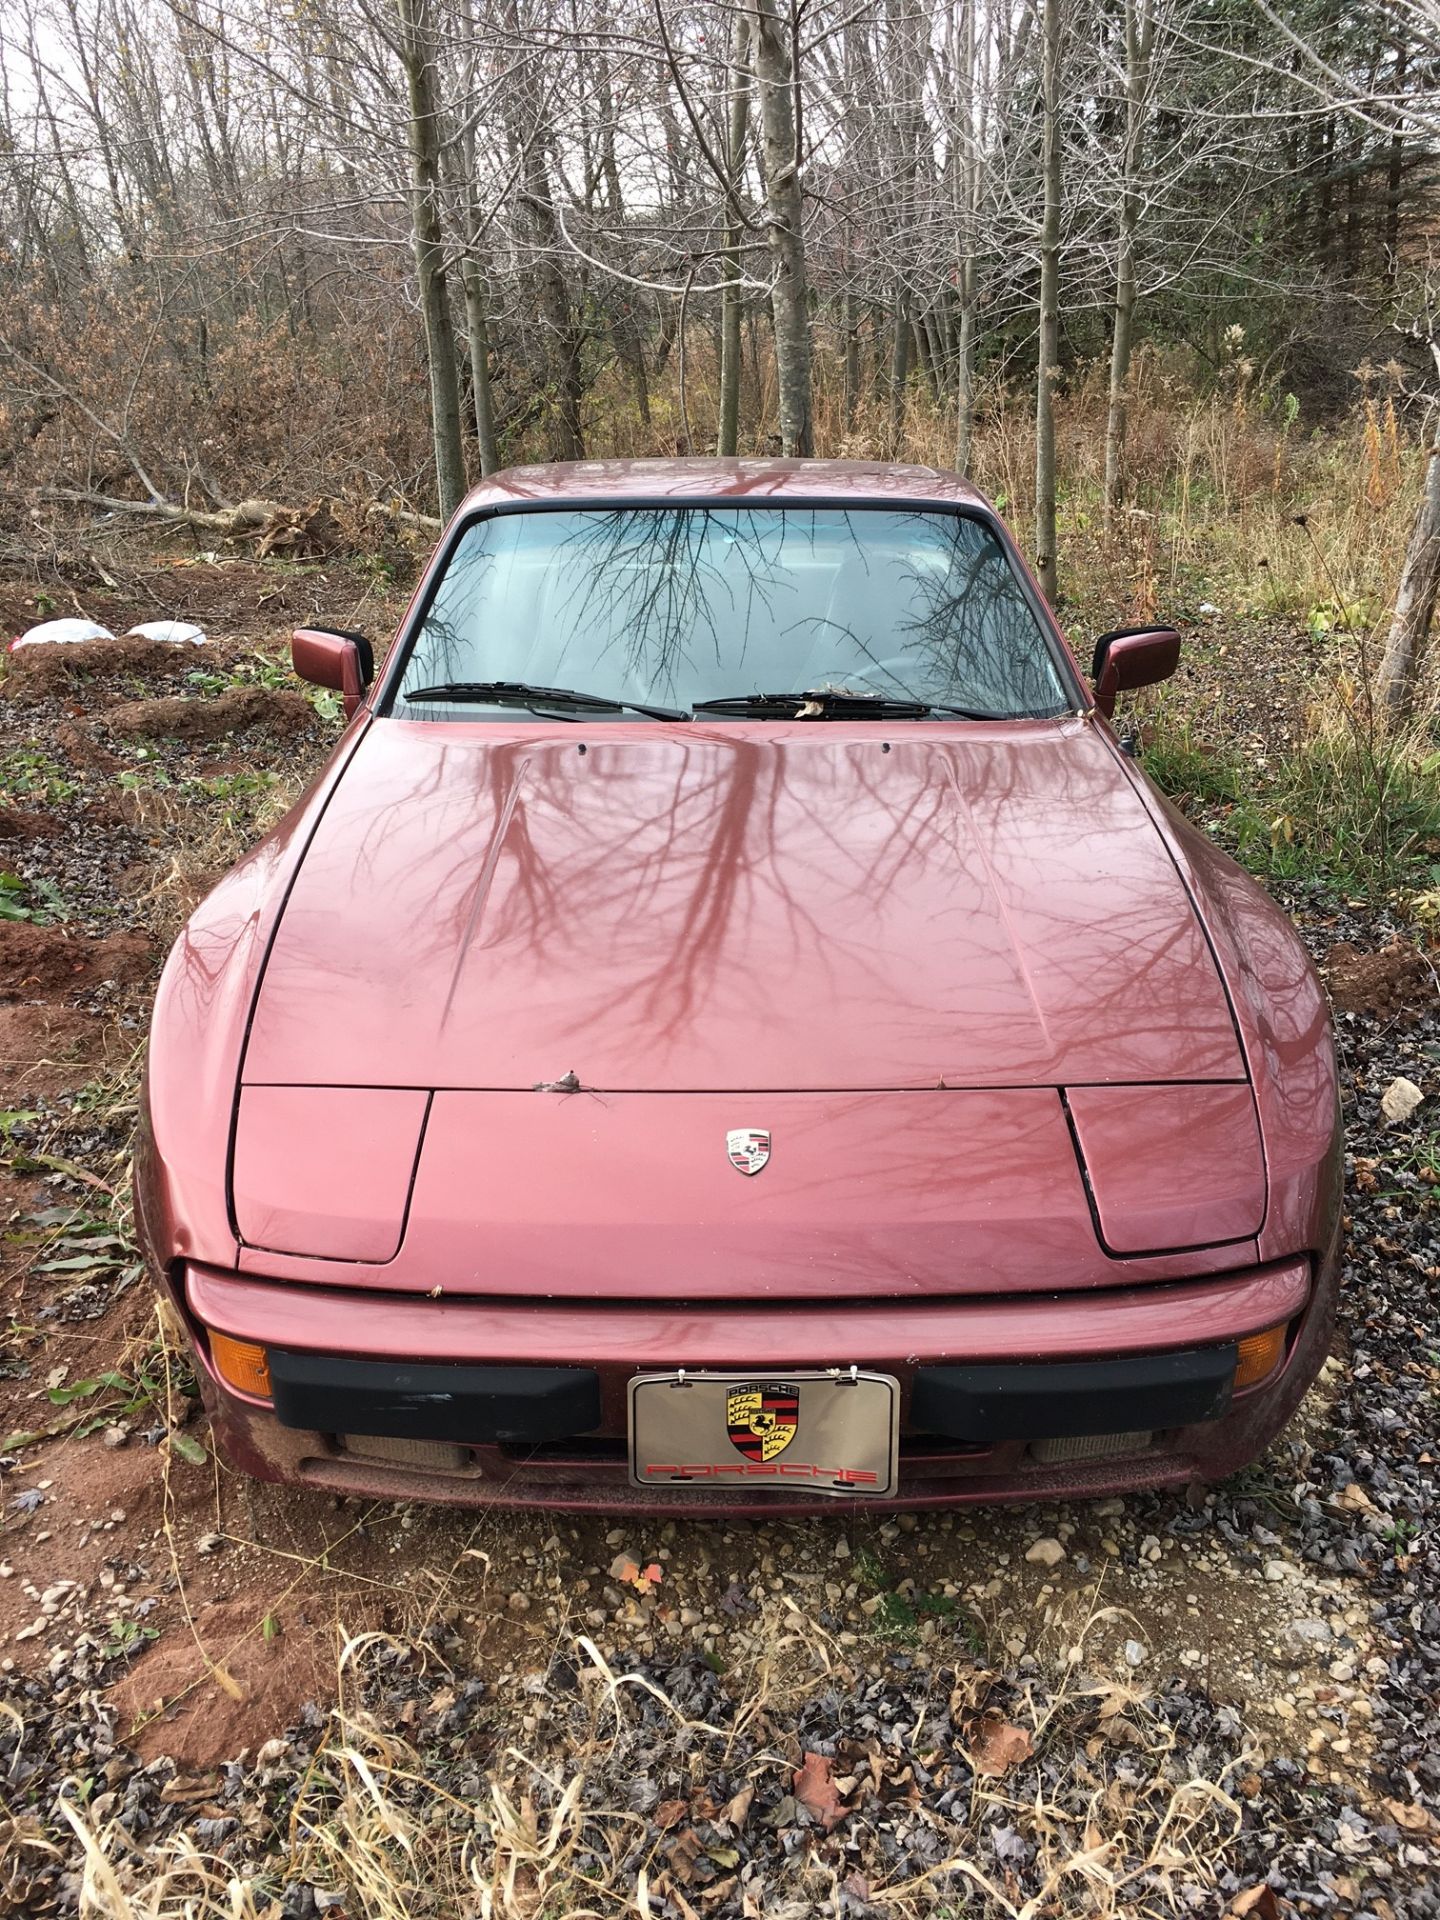 (1984) PORSCHE 944 VIN#: WP0AA0948EN461206; 5 SPEED MANUAL TRANSMISSION, RUNNING CONDITION - Image 11 of 12